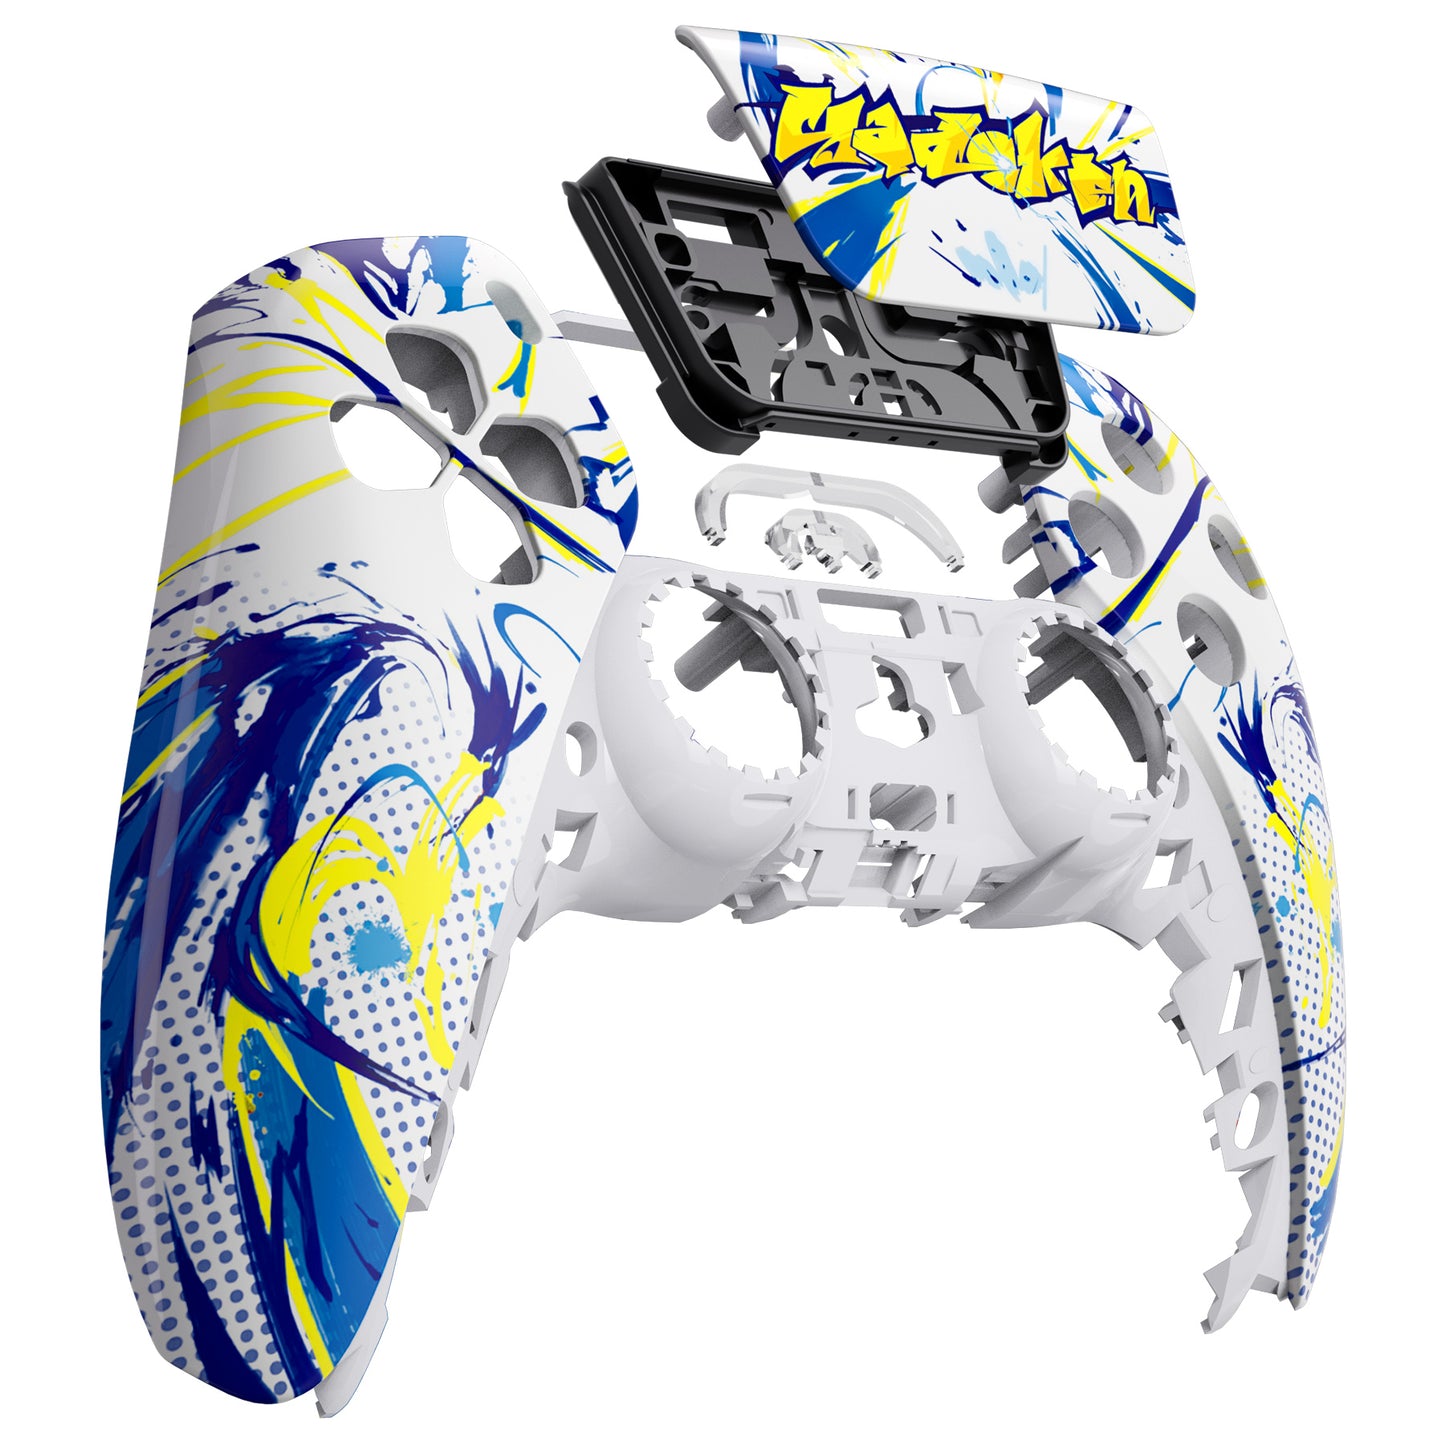 eXtremeRate Retail Street Graffiti Front Housing Shell Compatible with ps5 Controller BDM-010 BDM-020 BDM-030, DIY Replacement Shell Custom Touch Pad Cover Compatible with ps5 Controller - ZPFT1097G3